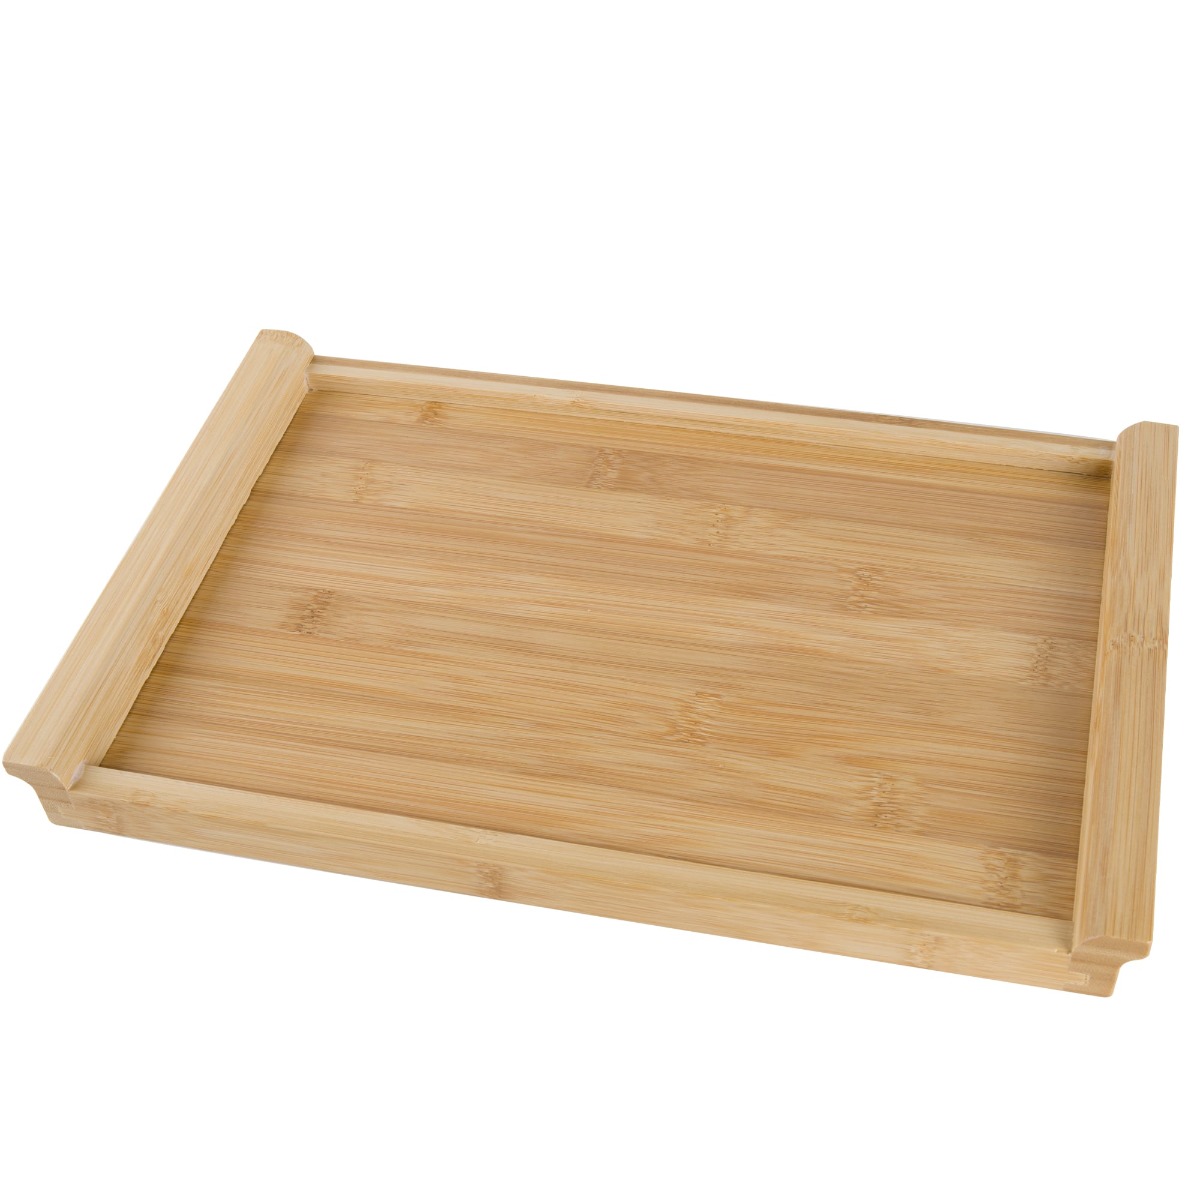 Bamboo Wood Natural Round Serving Tray, Raised Edge, Food Tray, Cut-Out  Handles (40*40*5cm)